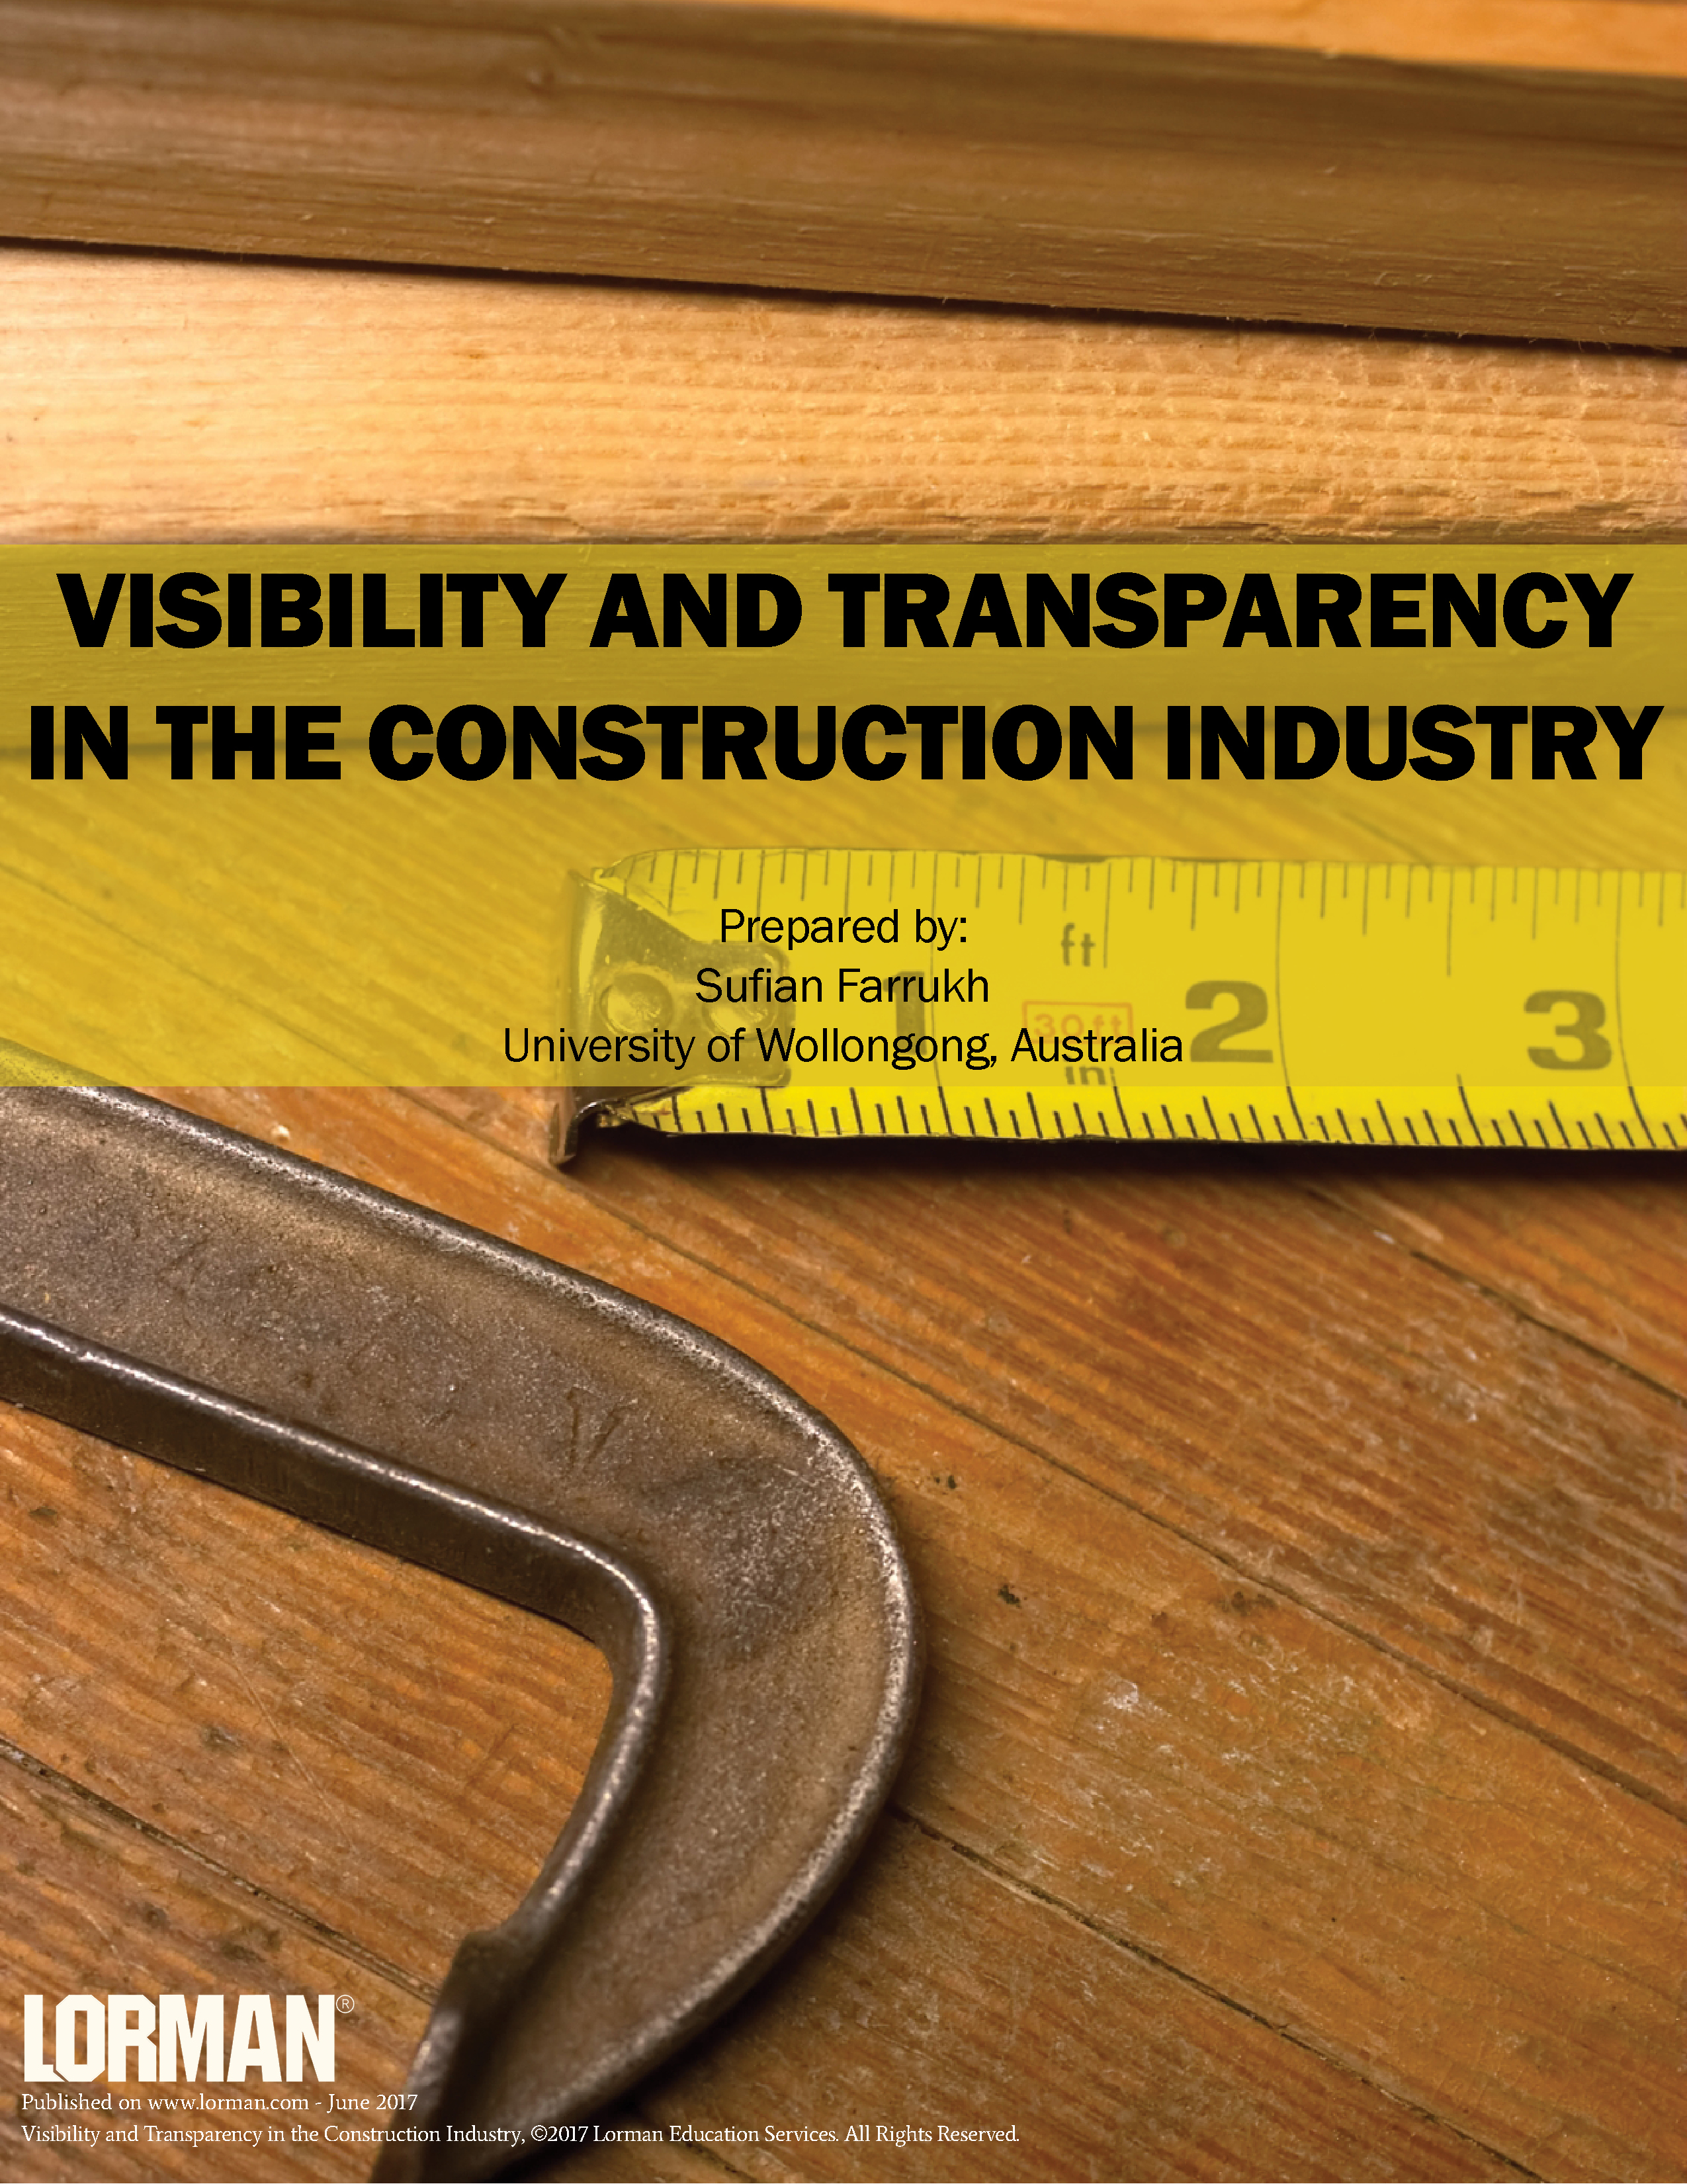 Visibility and Transparency in the Construction Industry